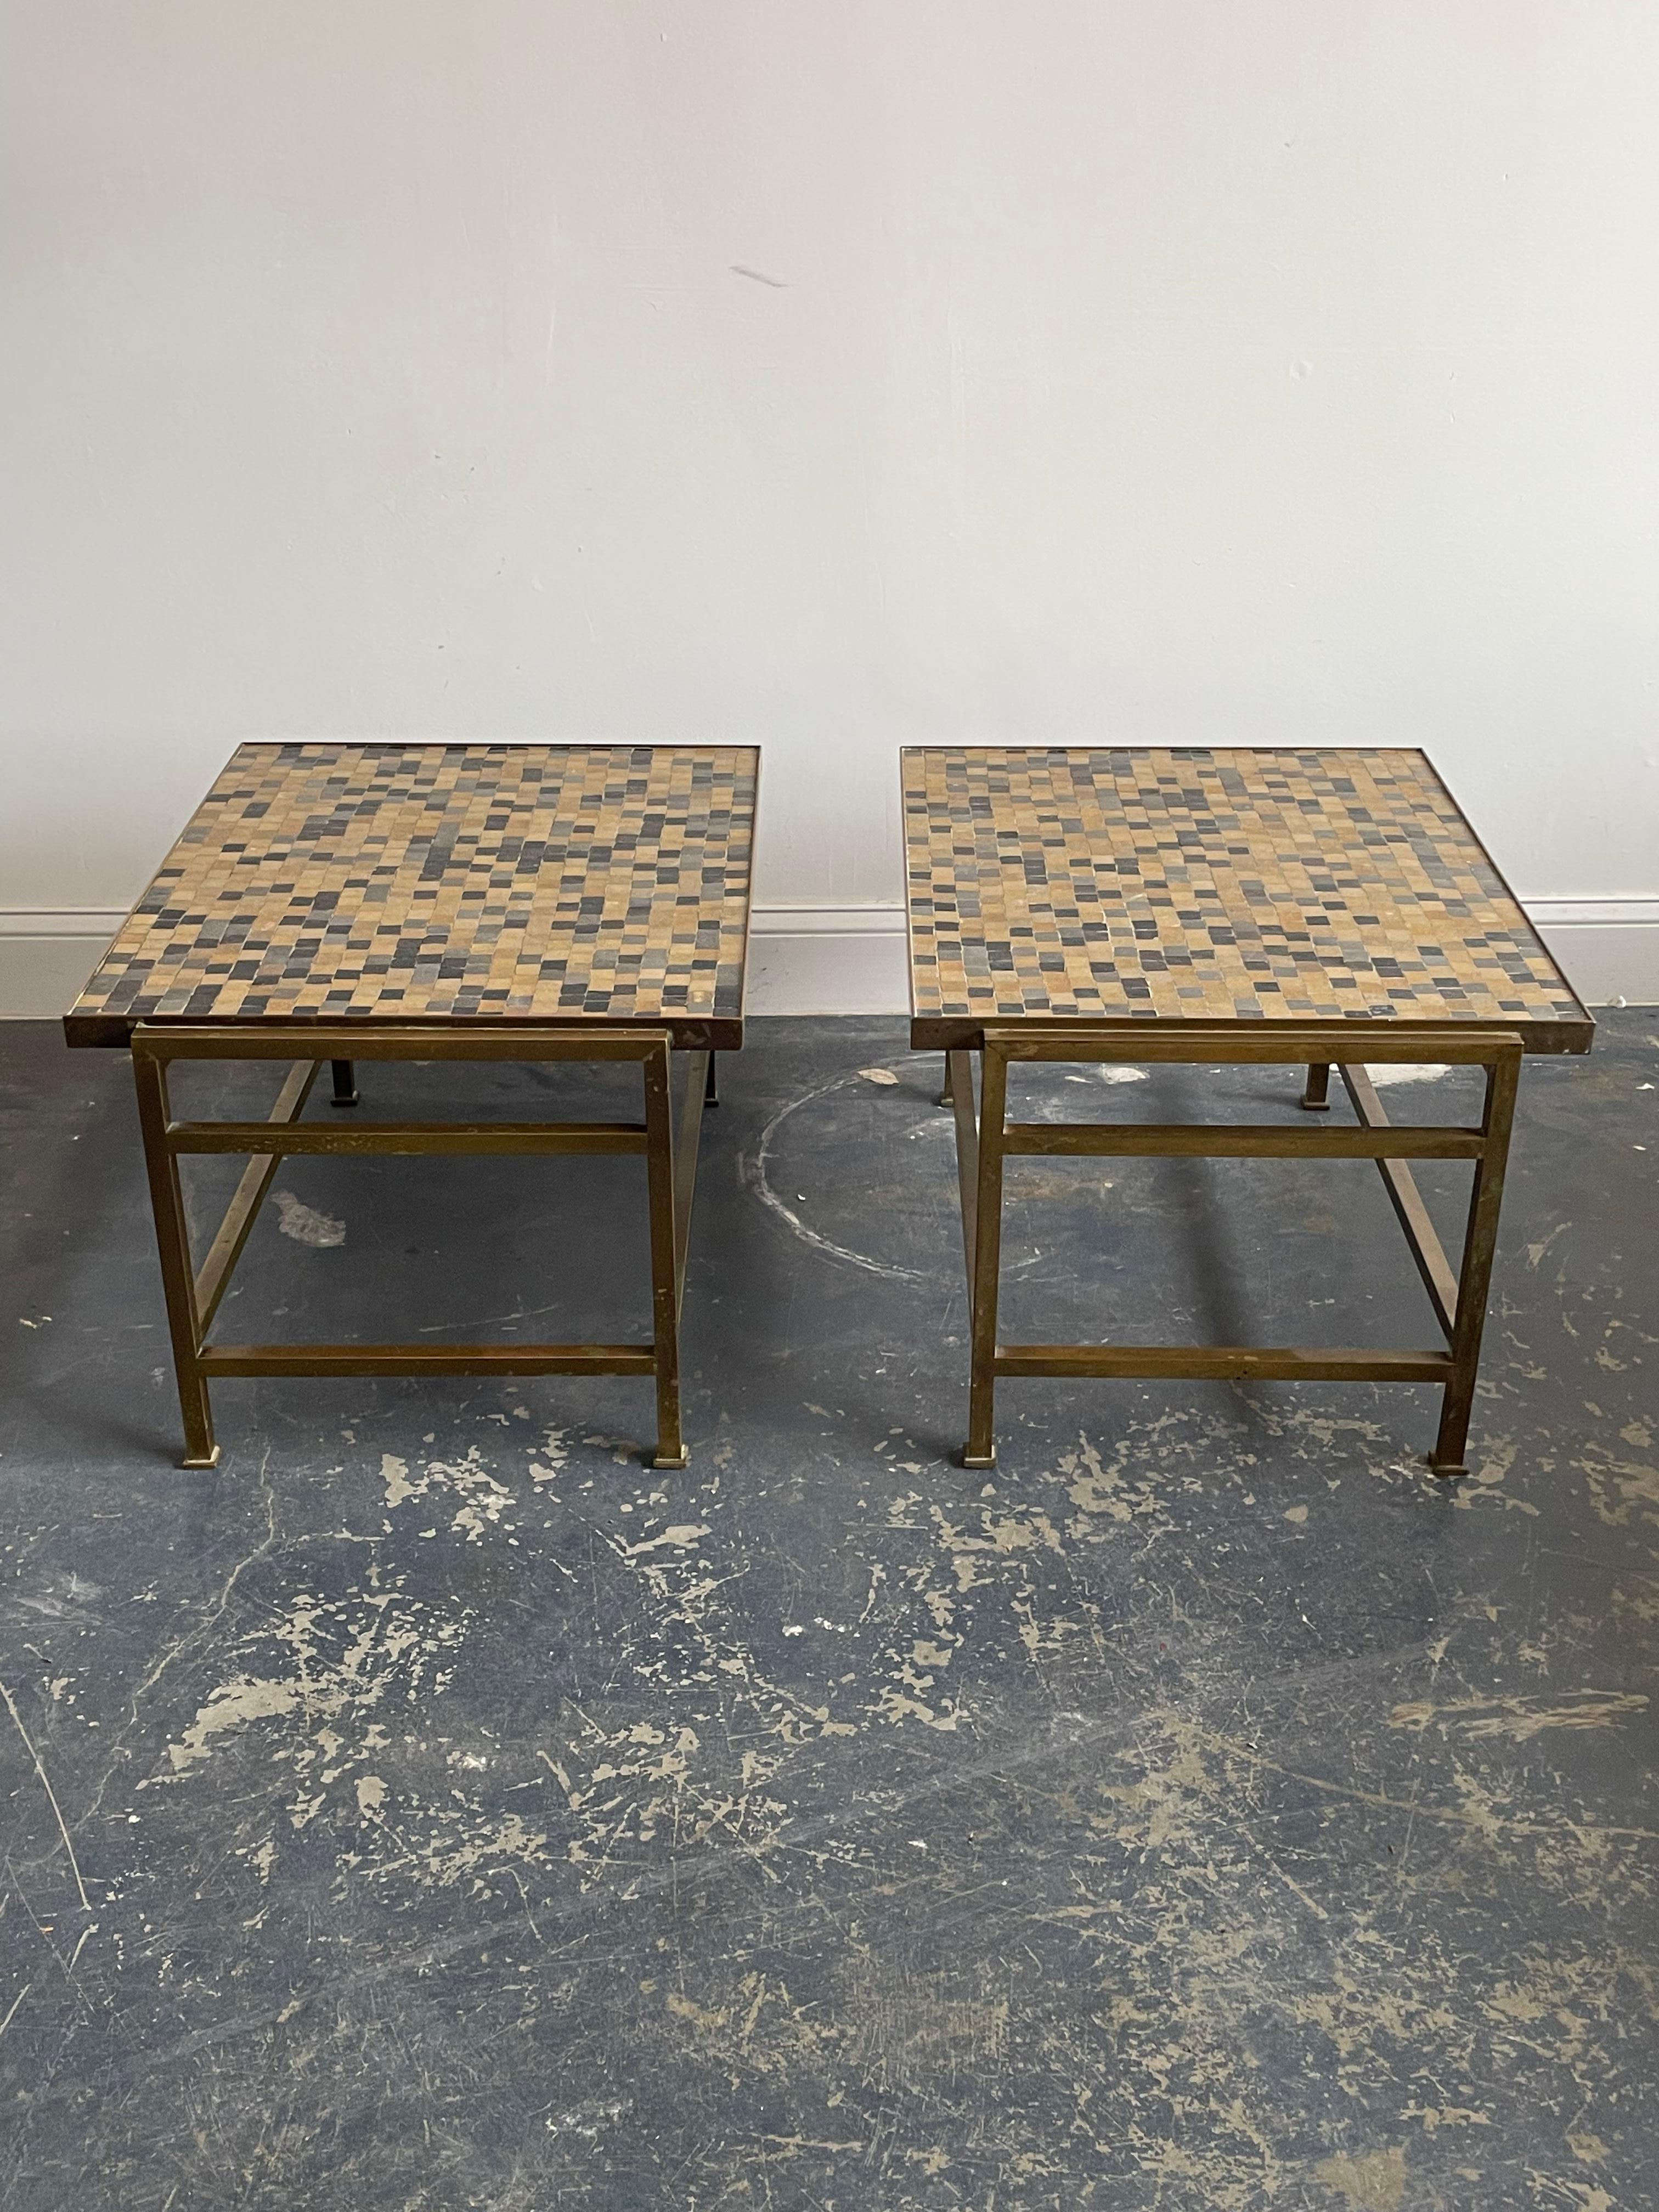 Rare pair of end tables designed by Edward Wormley for Dunbar. Featuring a mosaic murano glass tile top and brass framed base. Wonderful colors present throughout. In old original character with tasteful patina. 

Would work well with designers